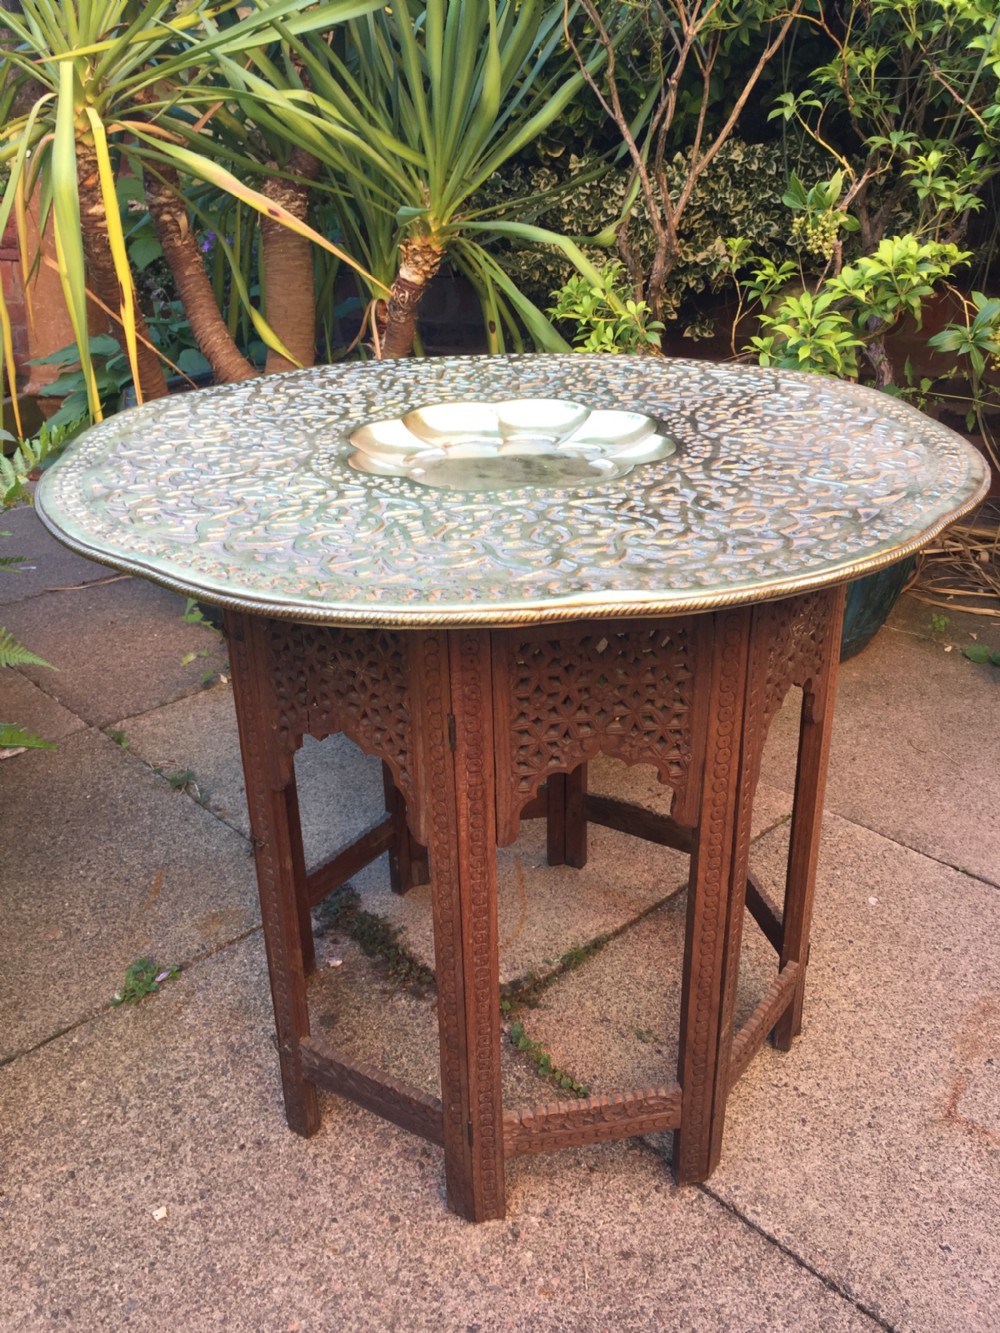 late c19th indian octagonal carved teak or 'shisham' table with castbrass top